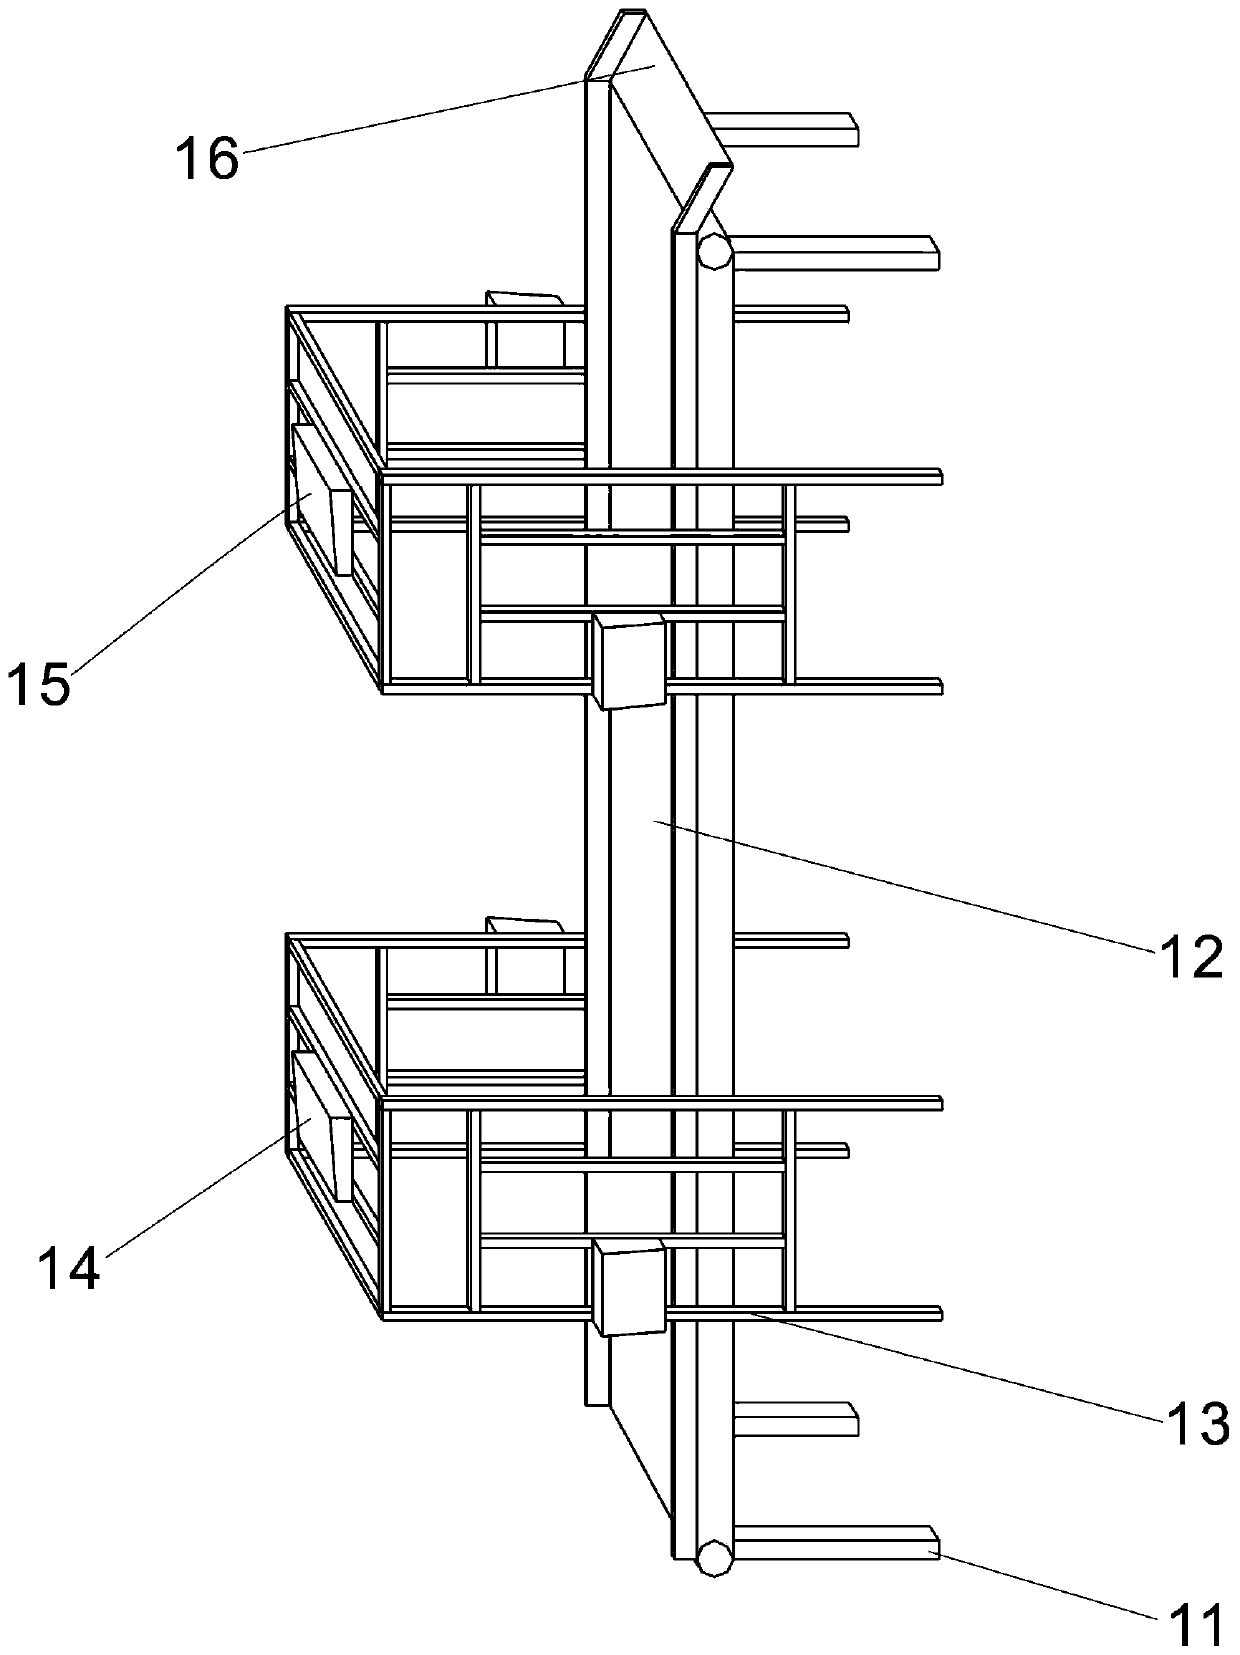 Automatic express parcel sorting and transporting equipment